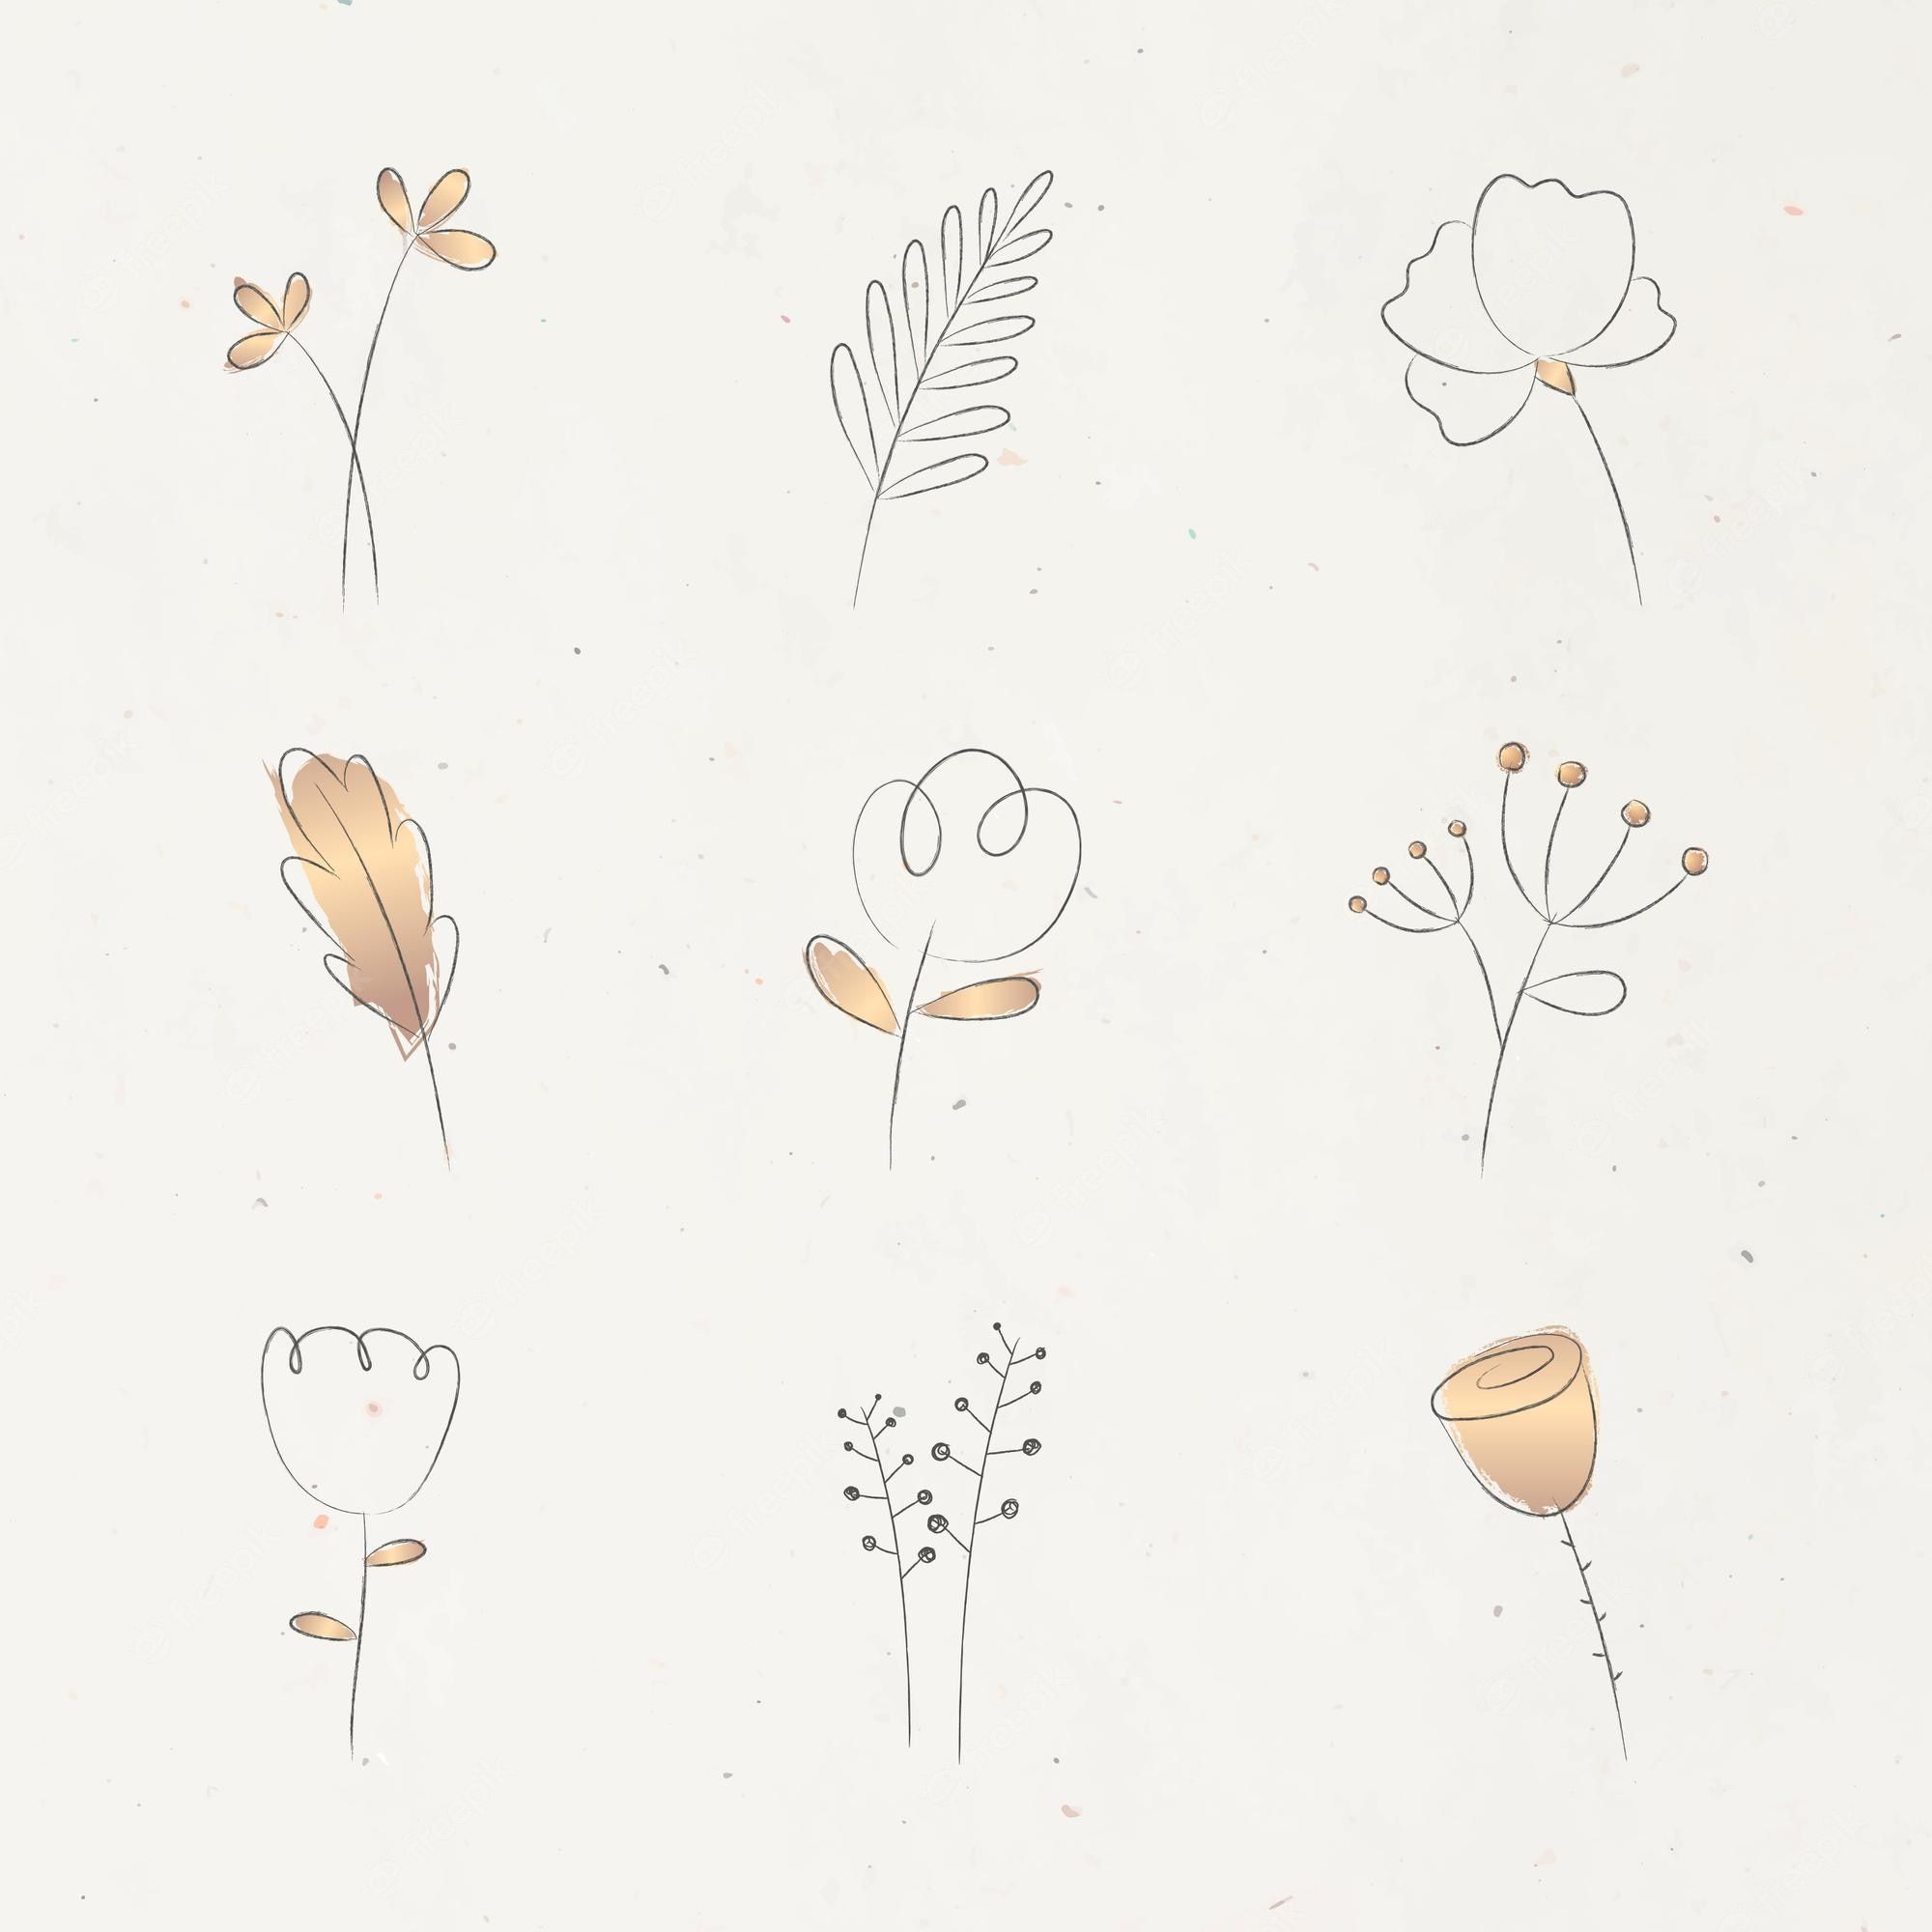 A set of flowers and leaves in different colors - Doodles